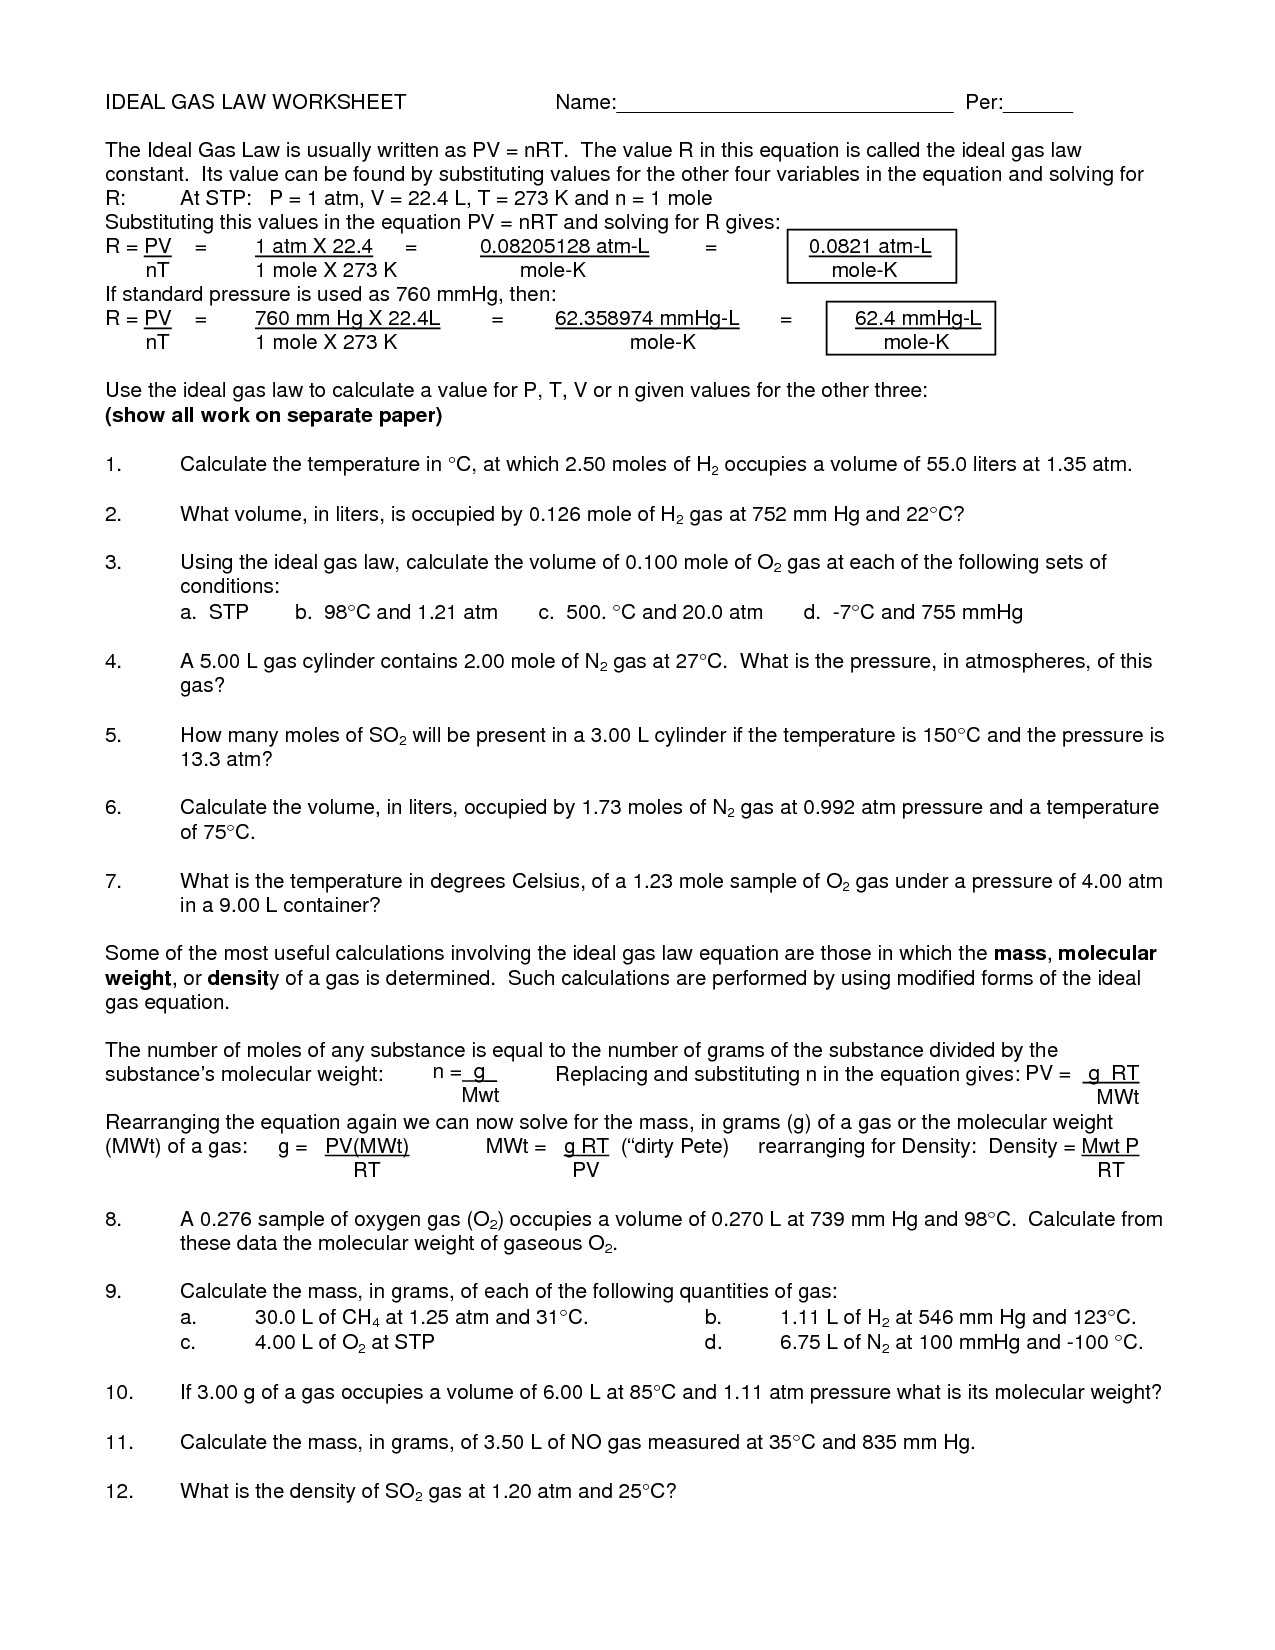 Gas Laws Practice Problems Worksheet Answers together with Gas Laws Worksheet 1 Answer Key Luxury Worksheet Templates Mixed Gas